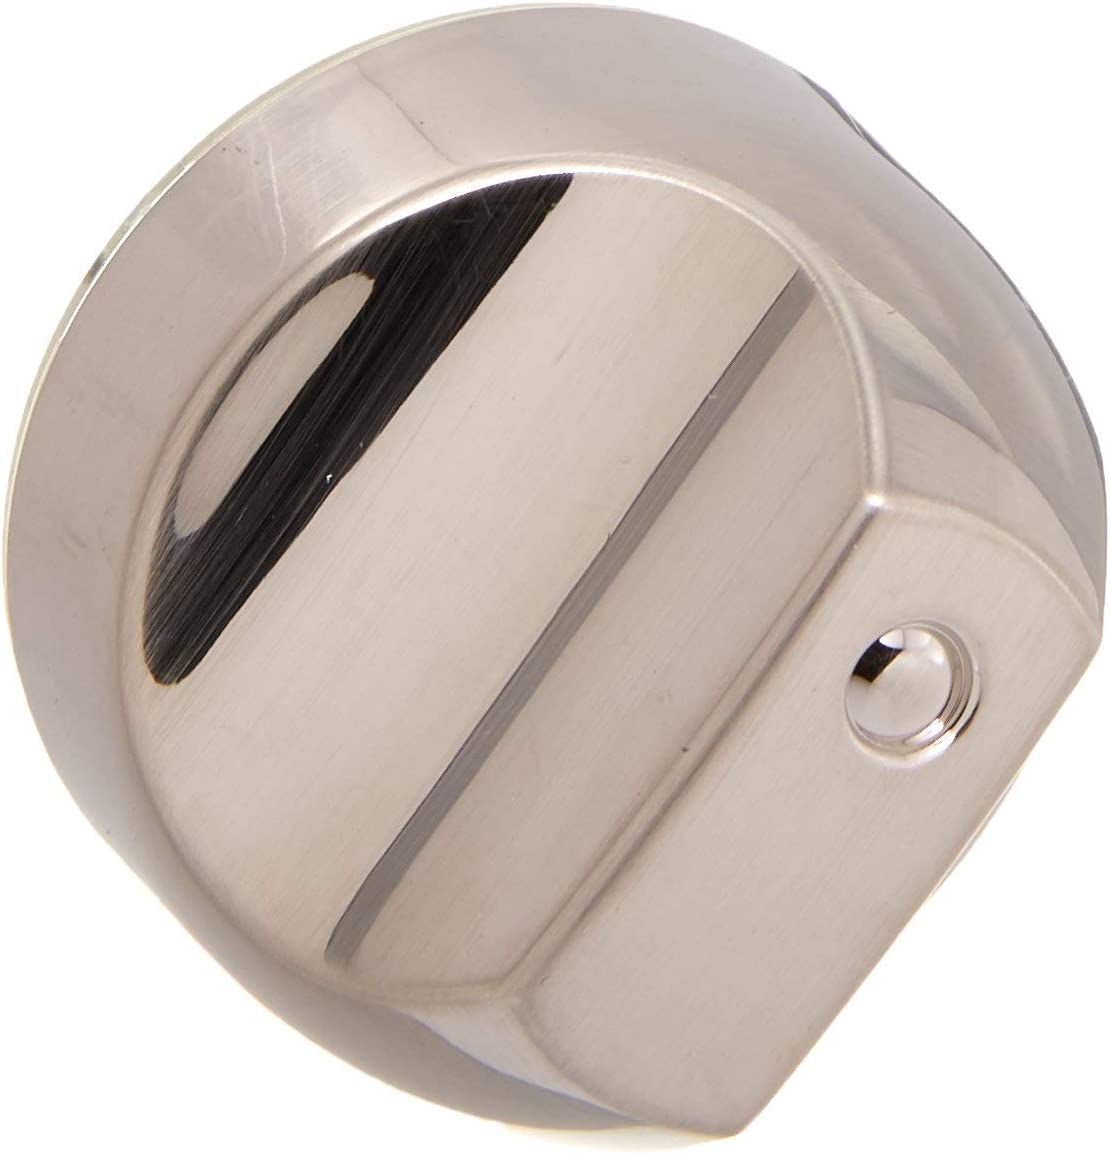 WB03X25889 Knob Compatible with General Electric Stove/Range